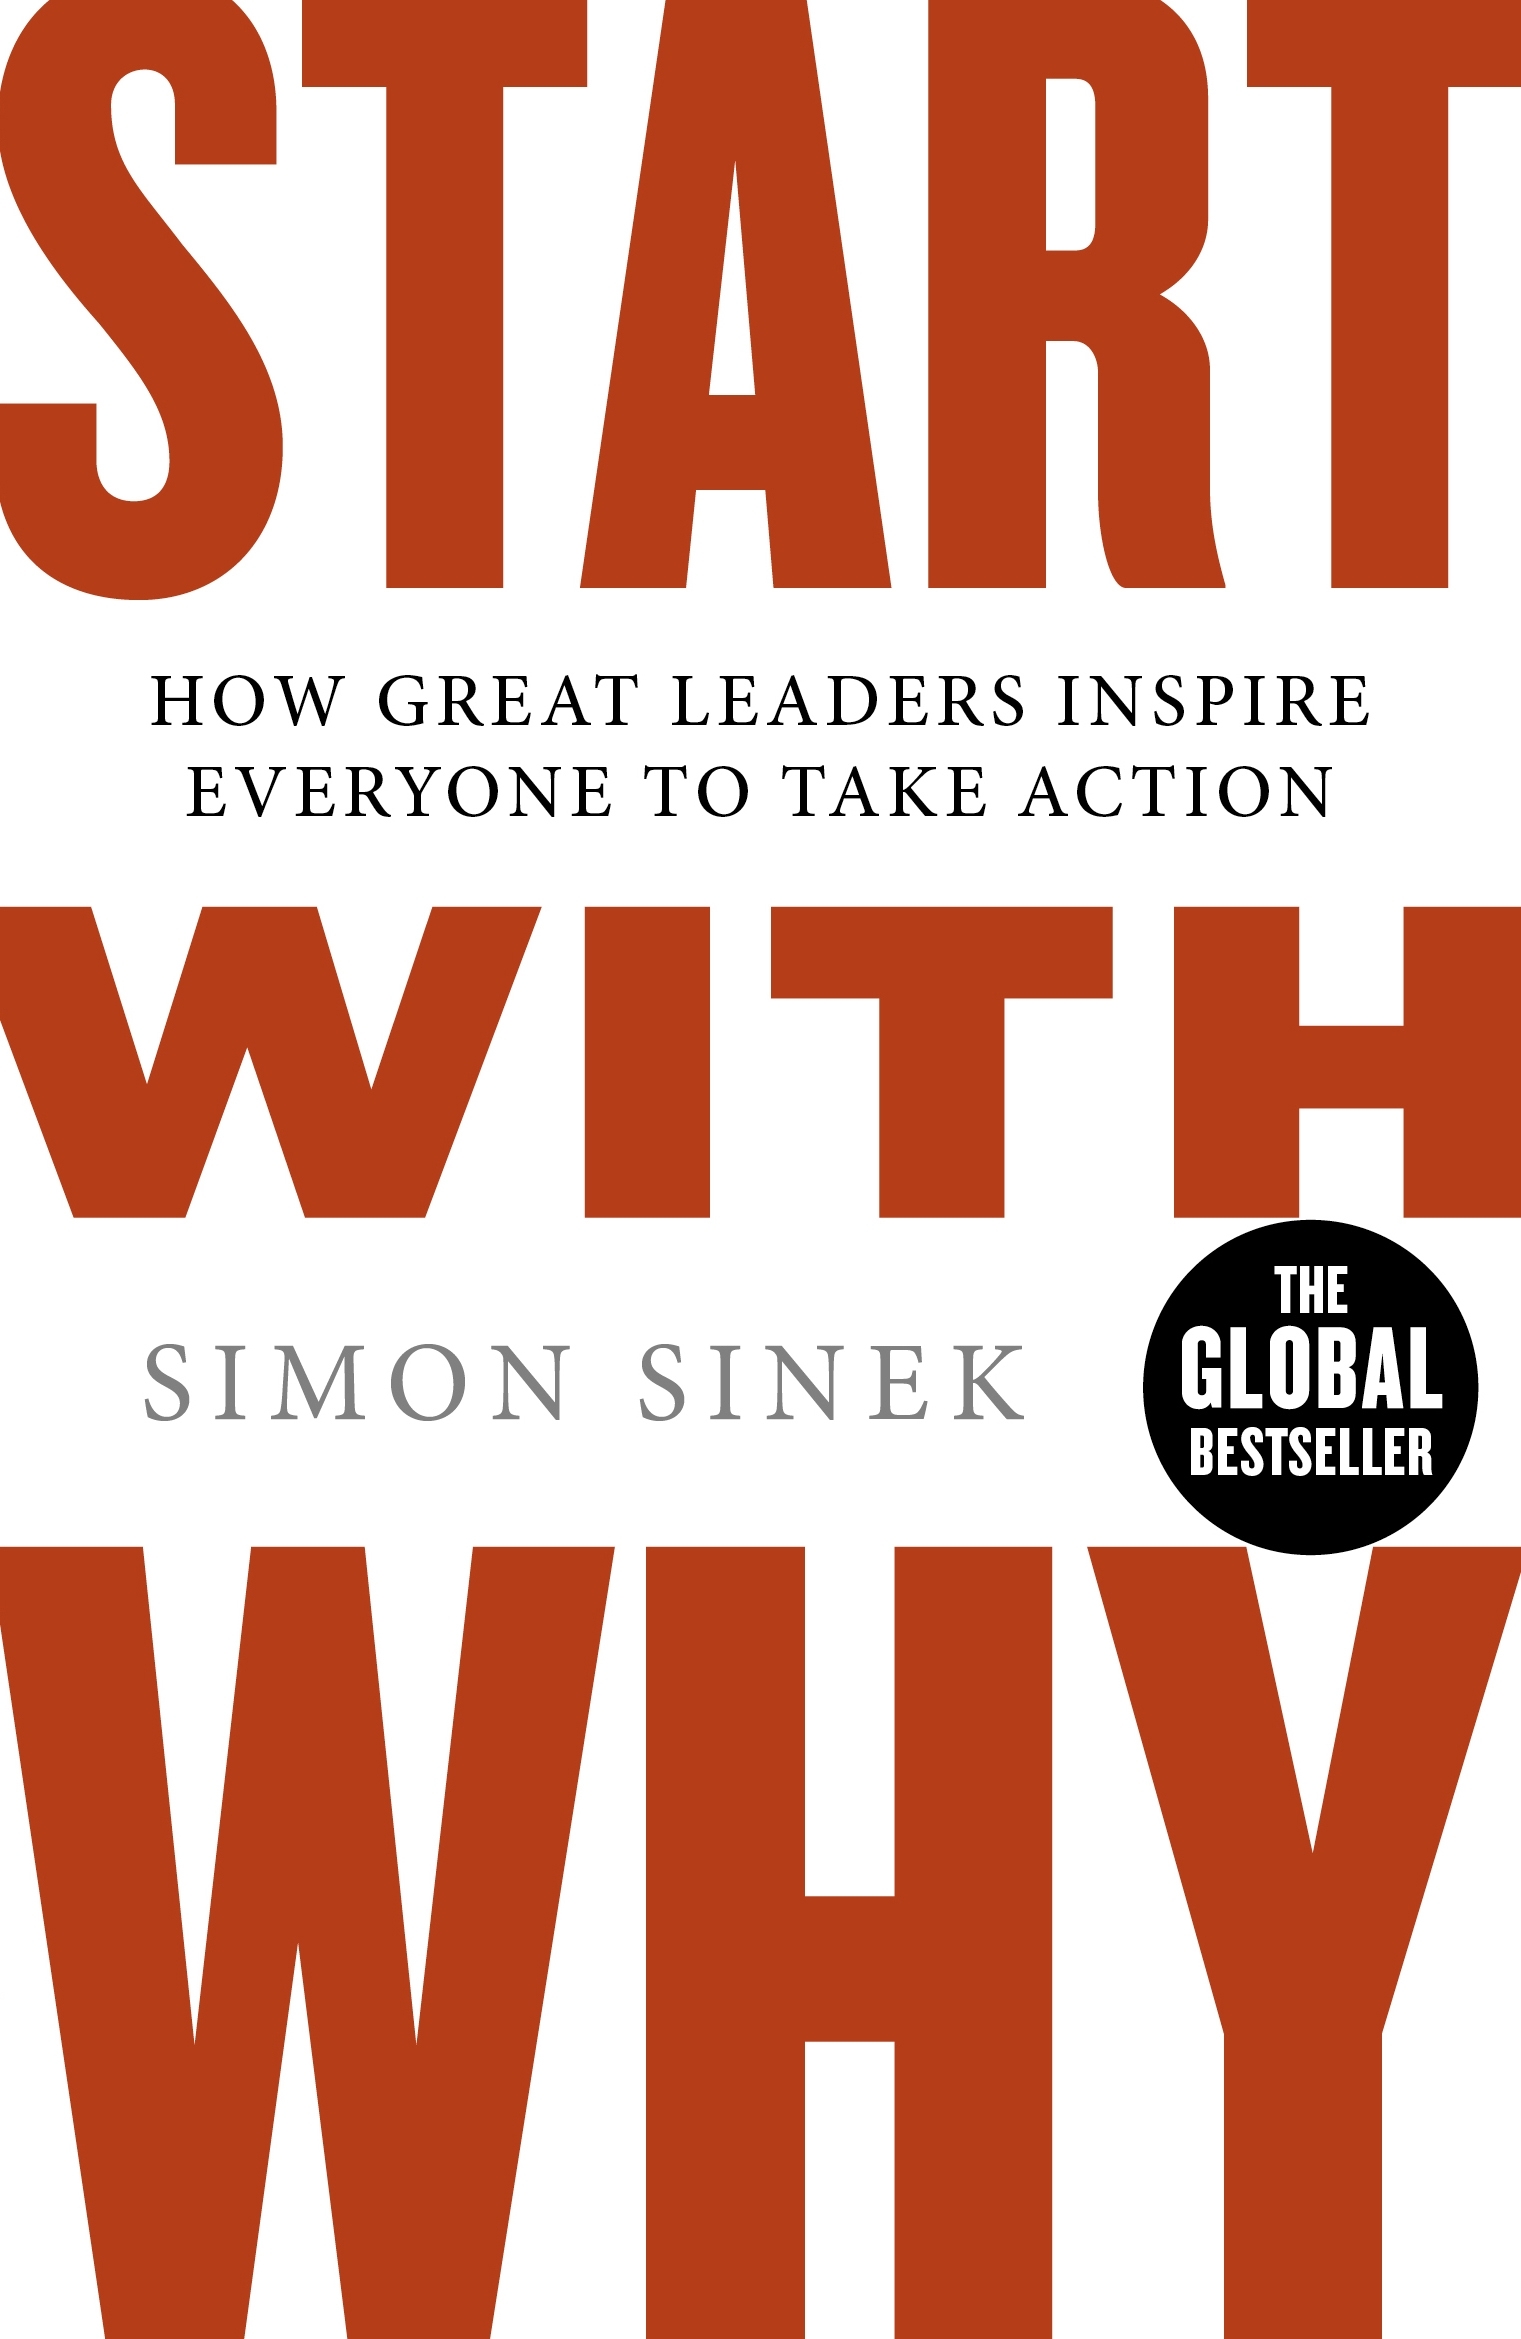 book review of start with why